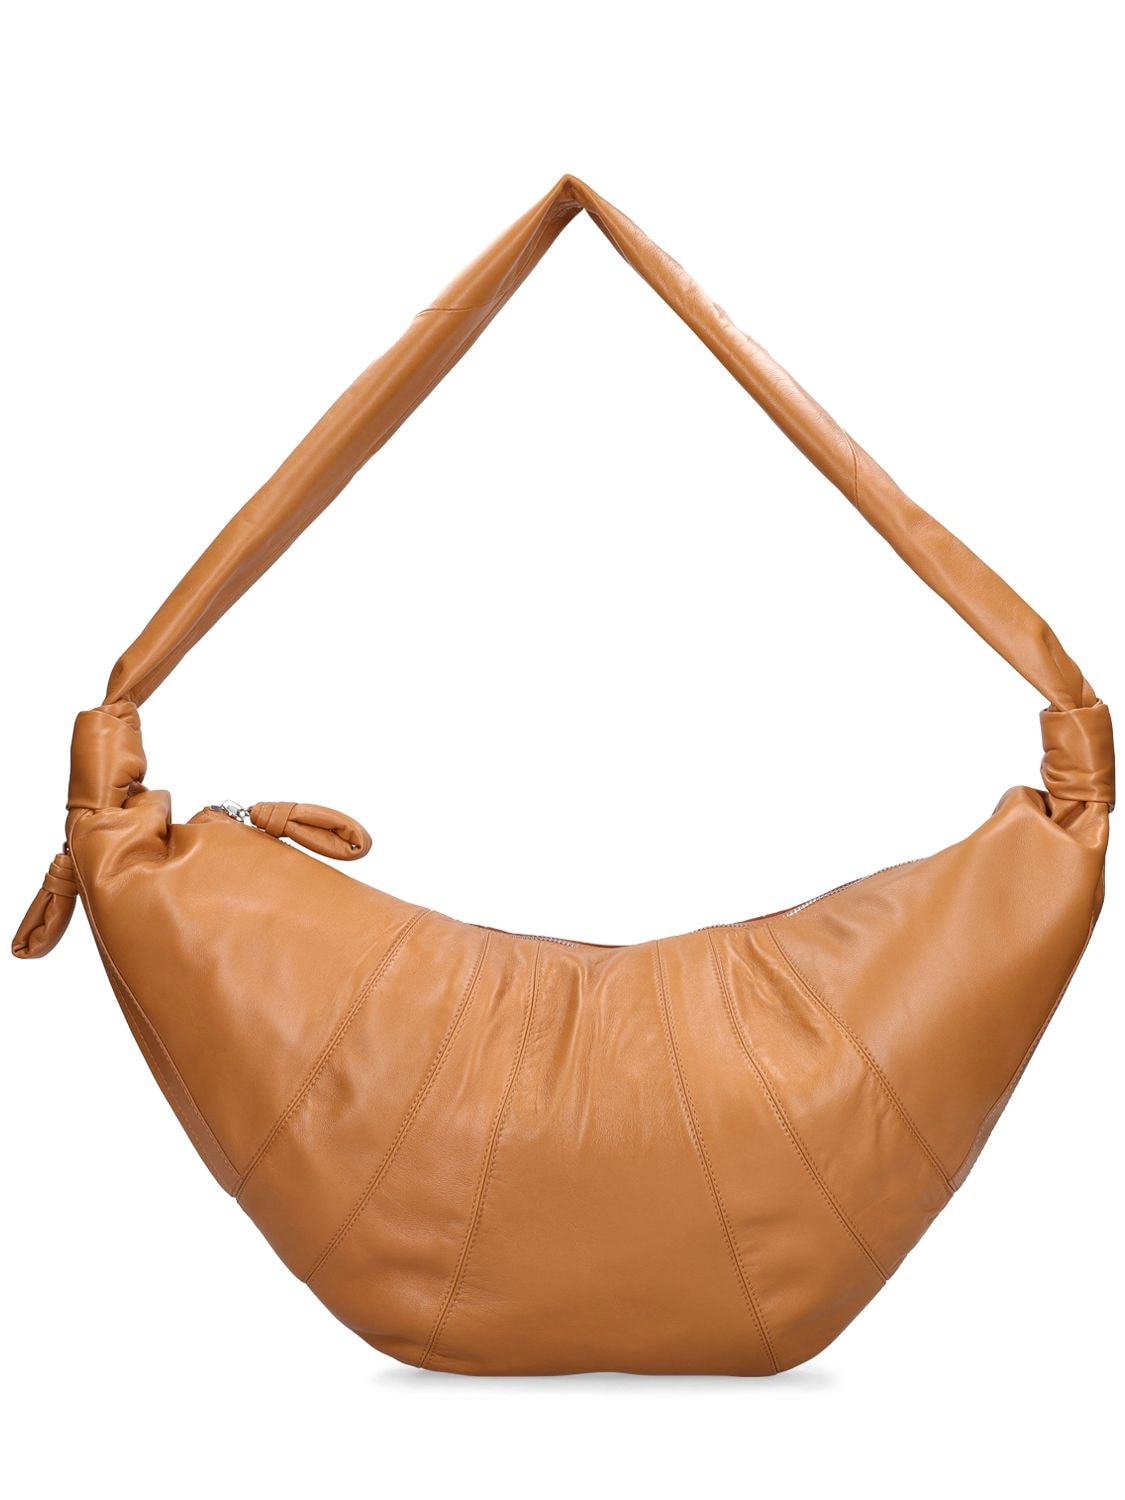 Lemaire Croissant Large Bag In Sugar Brown